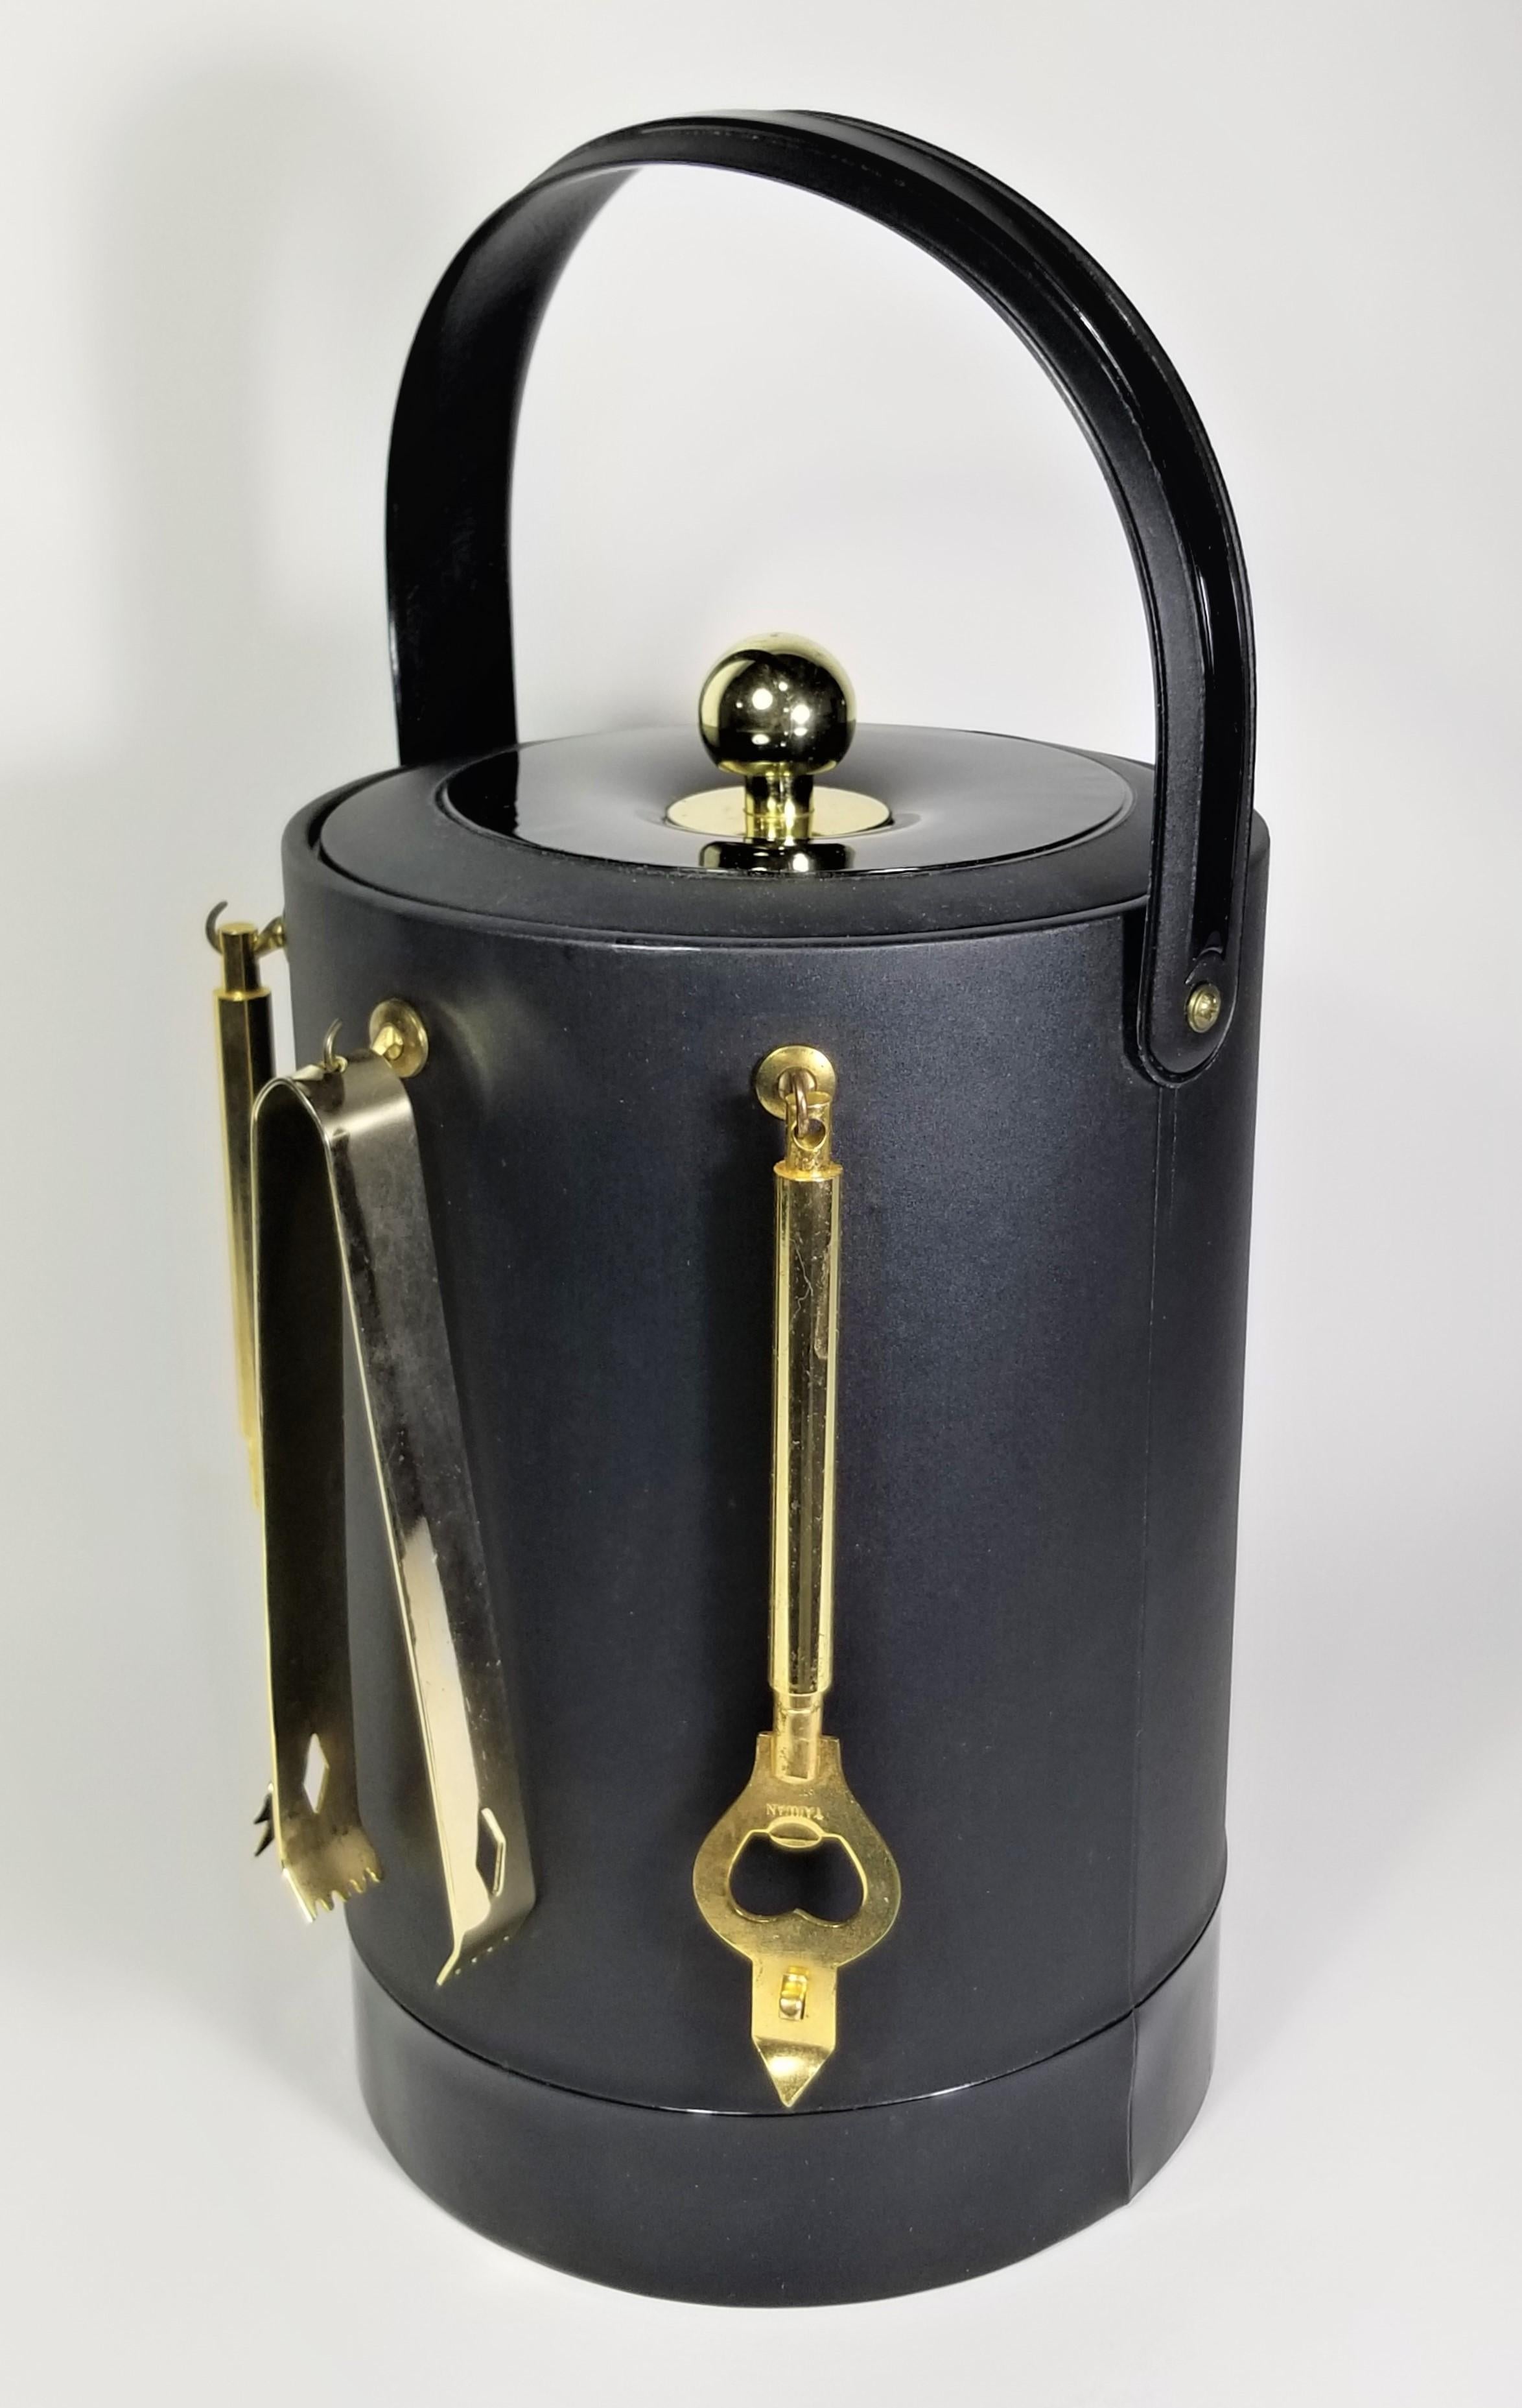 Mid Century 1960s Georges Briard Signed Barware. Black Ice Bucket with Gold Utensils. 

Measurements:
Height with Handle Up: 16.0 inches
Height with Handle Down: 12.75 inches
Diameter: 9.0 inches